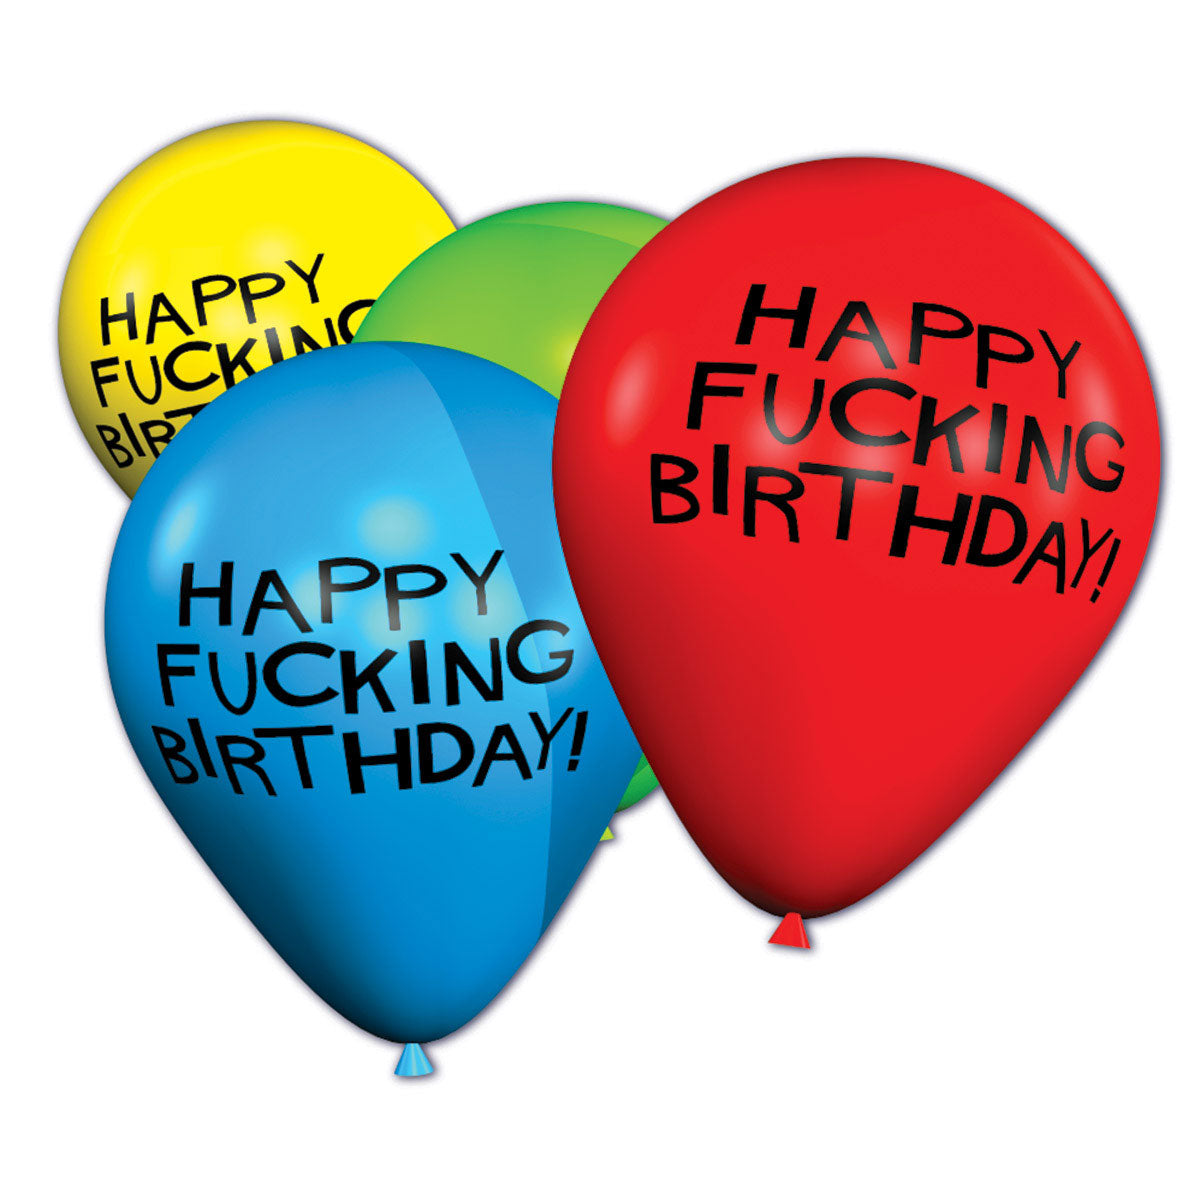 Candyprints X-Rated Birthday Balloons - 8 pack